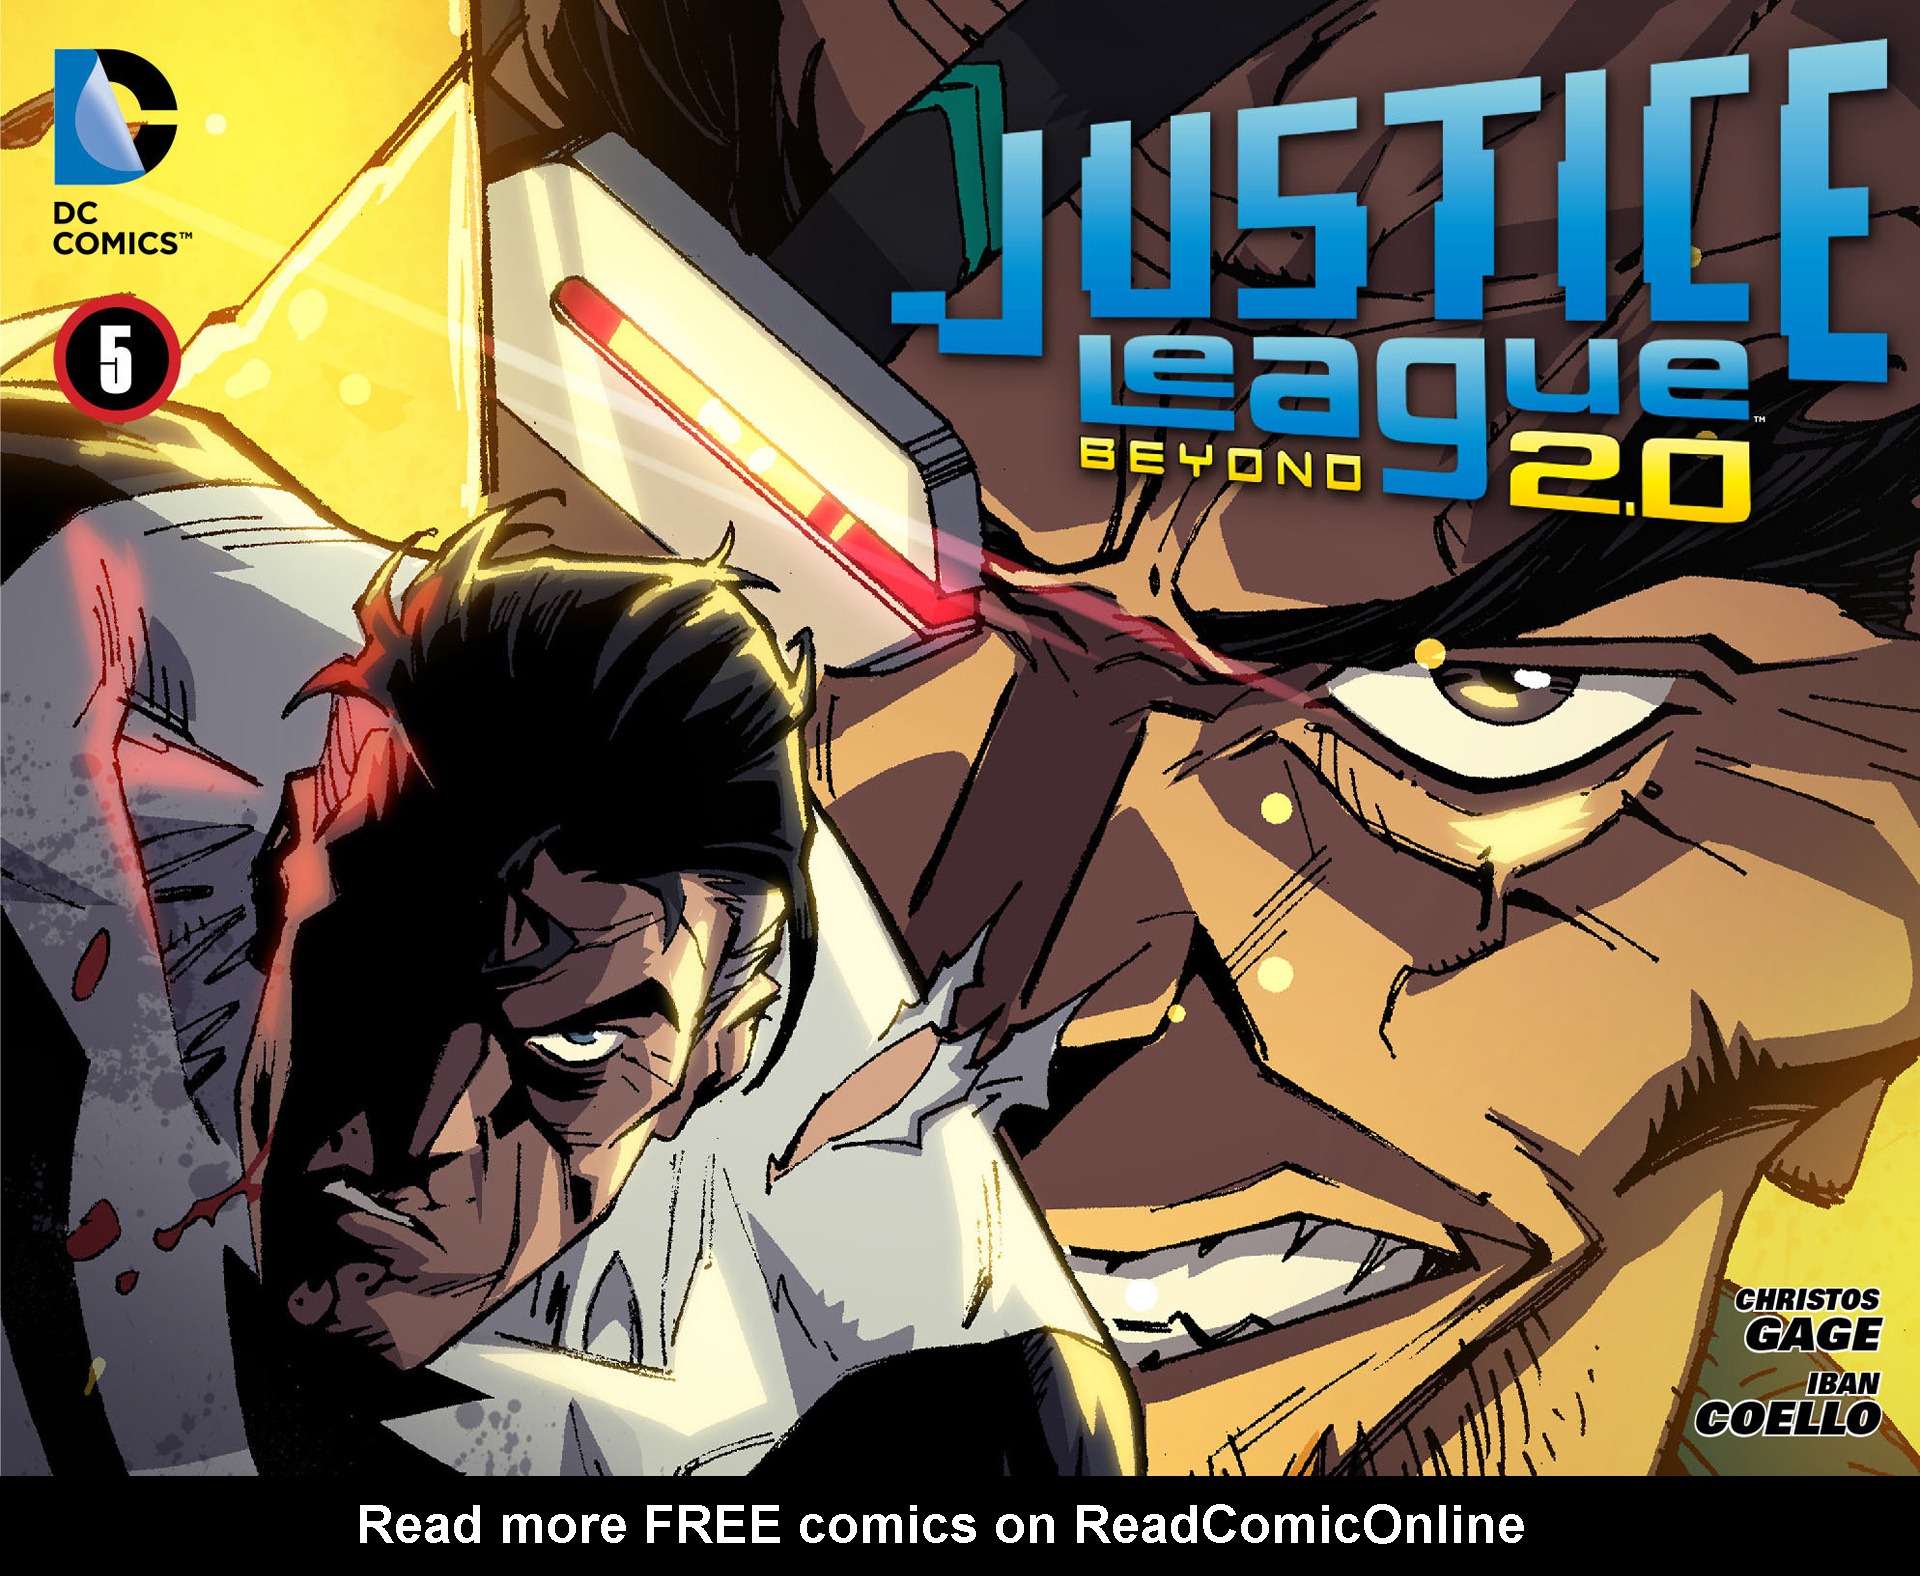 Read online Justice League Beyond 2.0 comic -  Issue #5 - 1